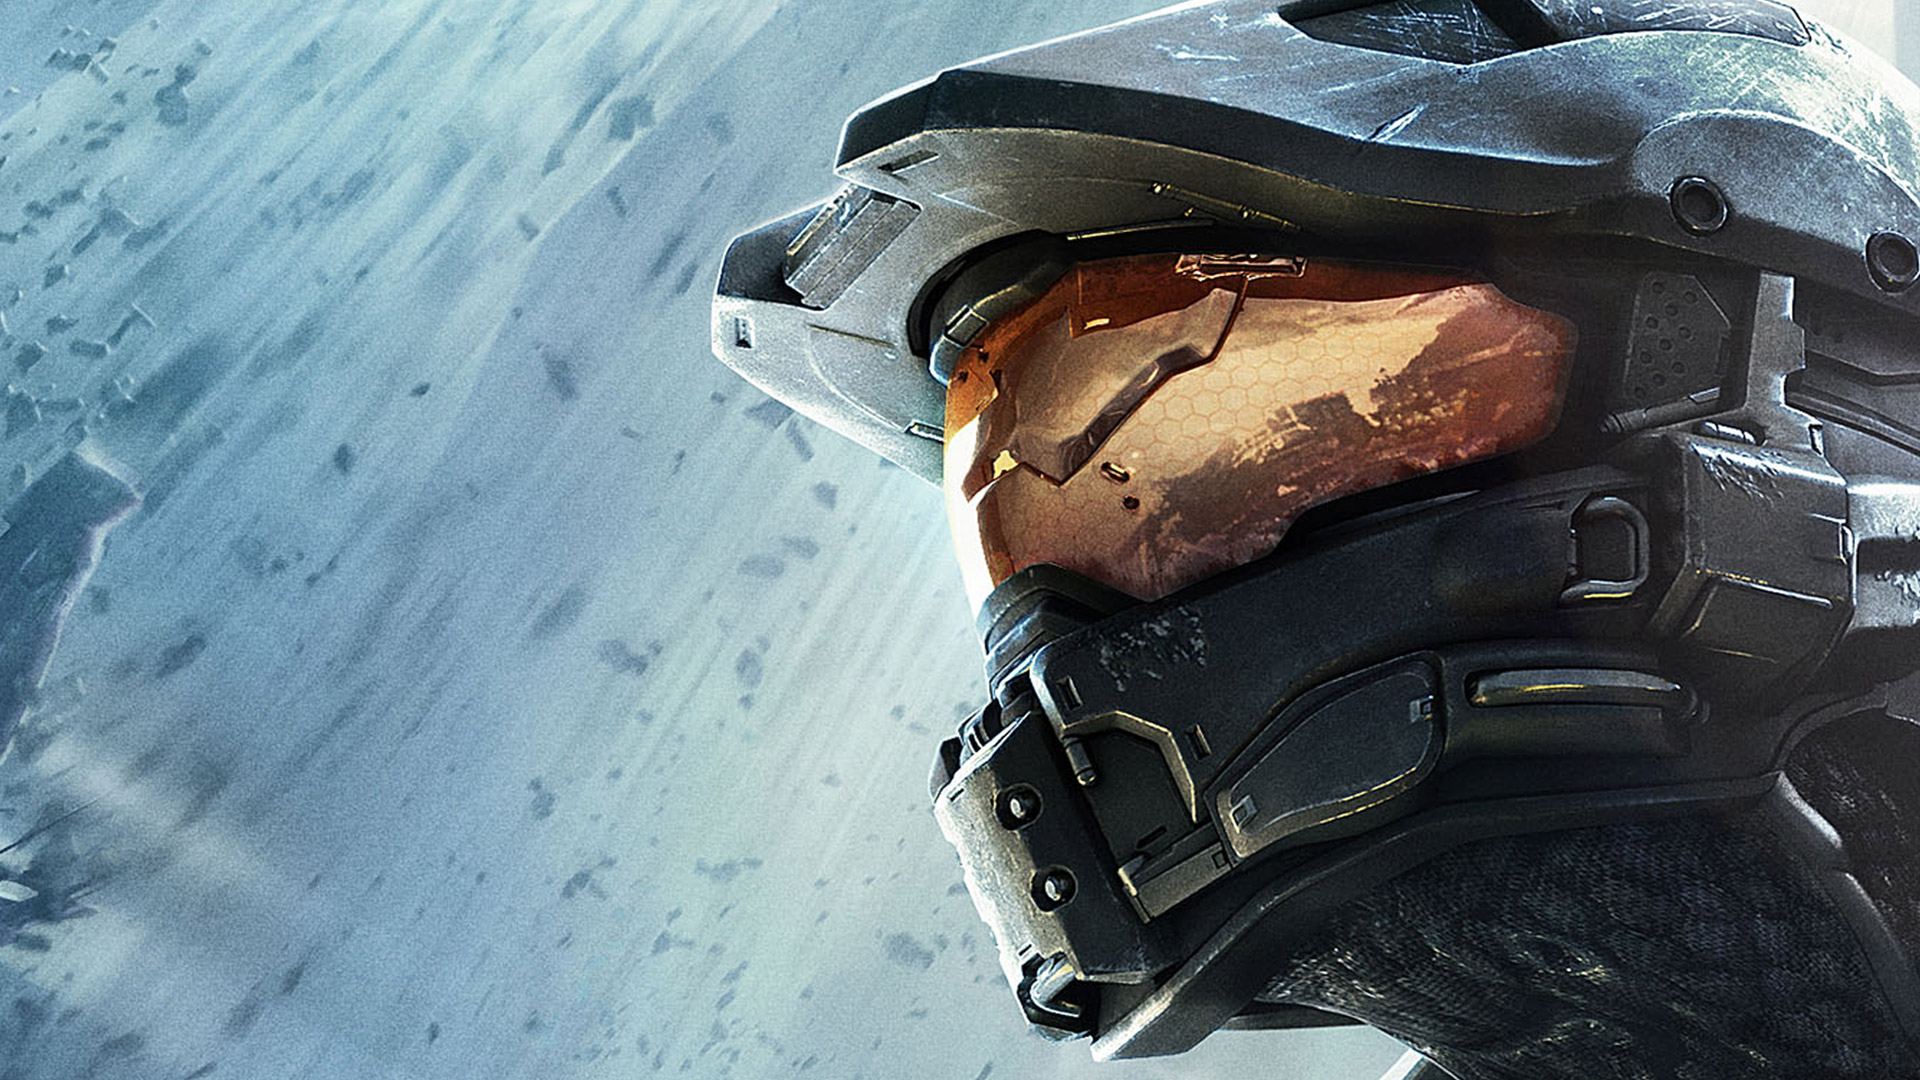 Halo hd wallpapers